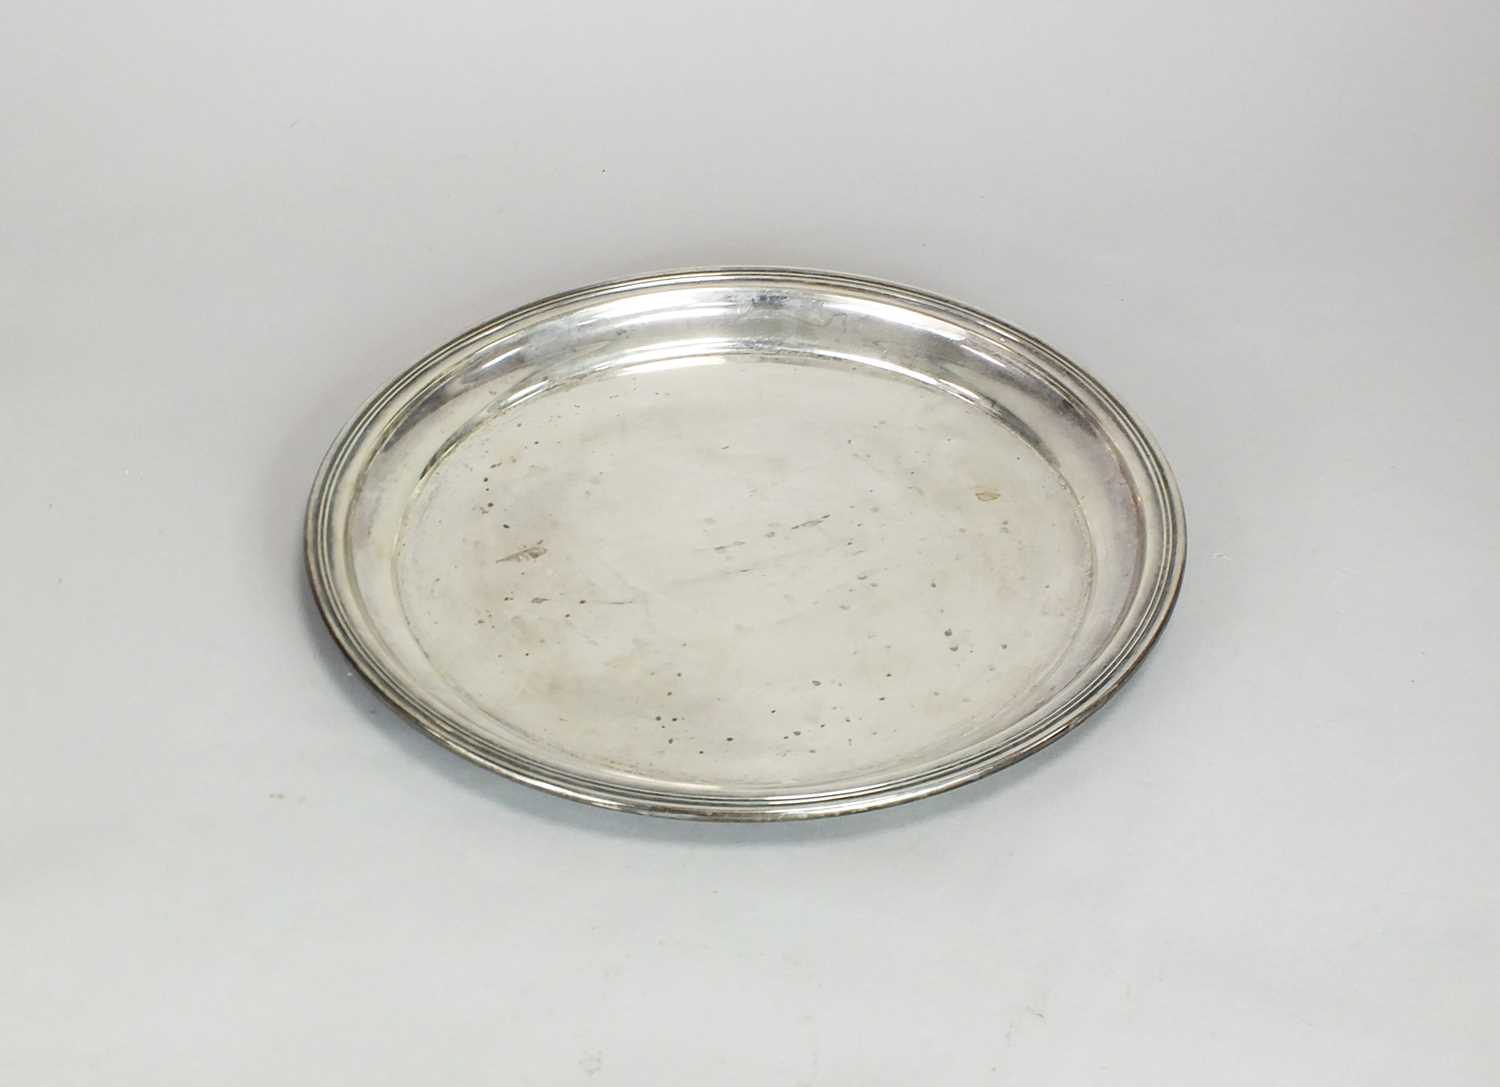 Lot 120 - An American Sterling silver salver/plate by Gorham